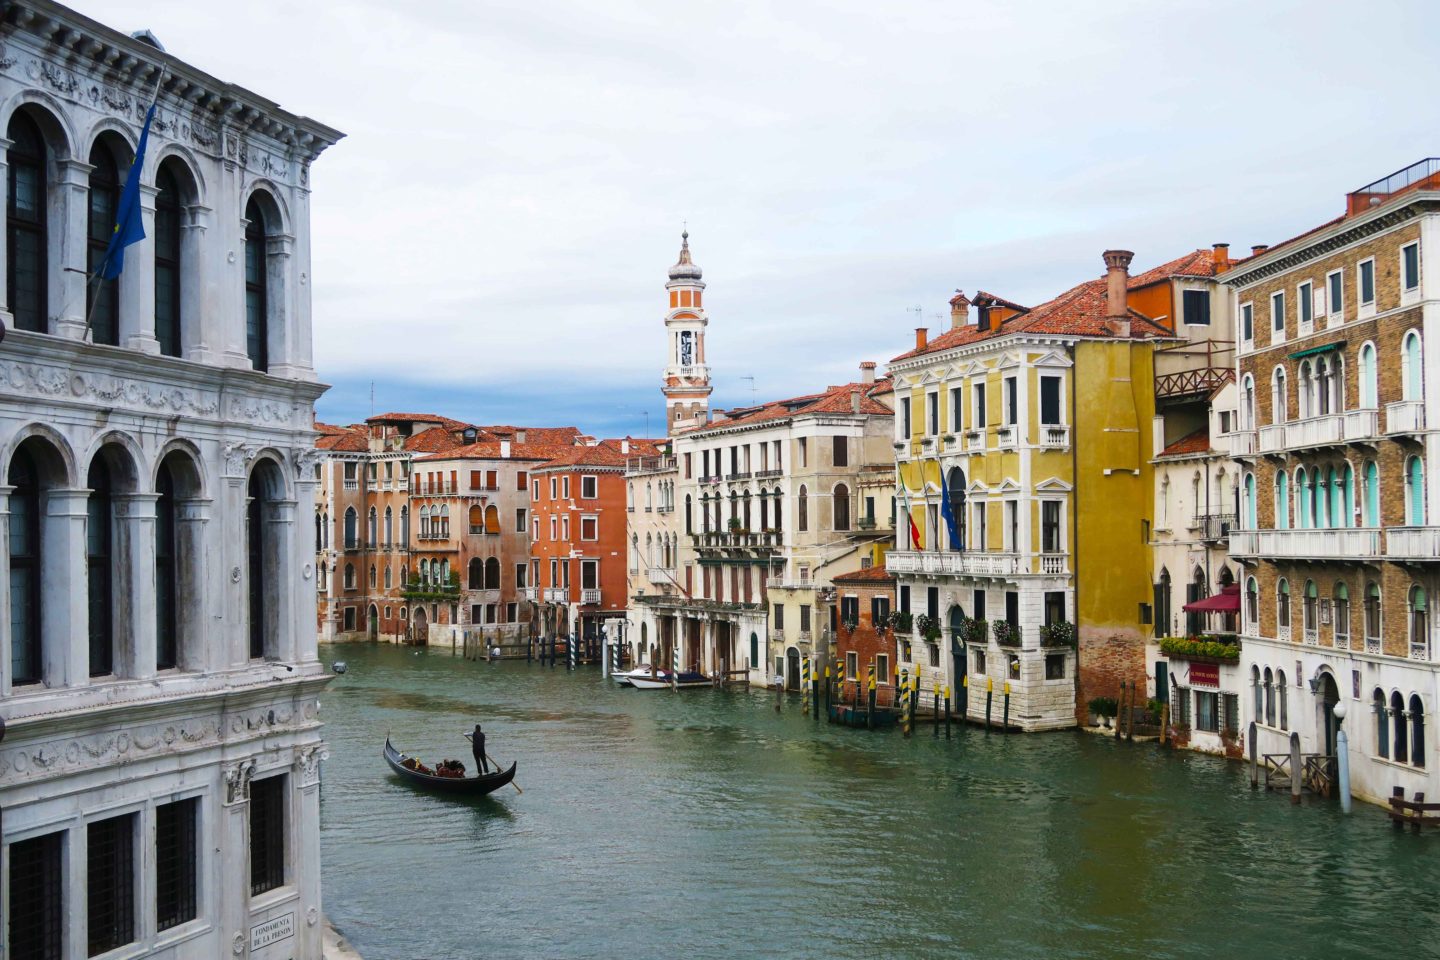 view from bridge in venice of a gondola in the canal